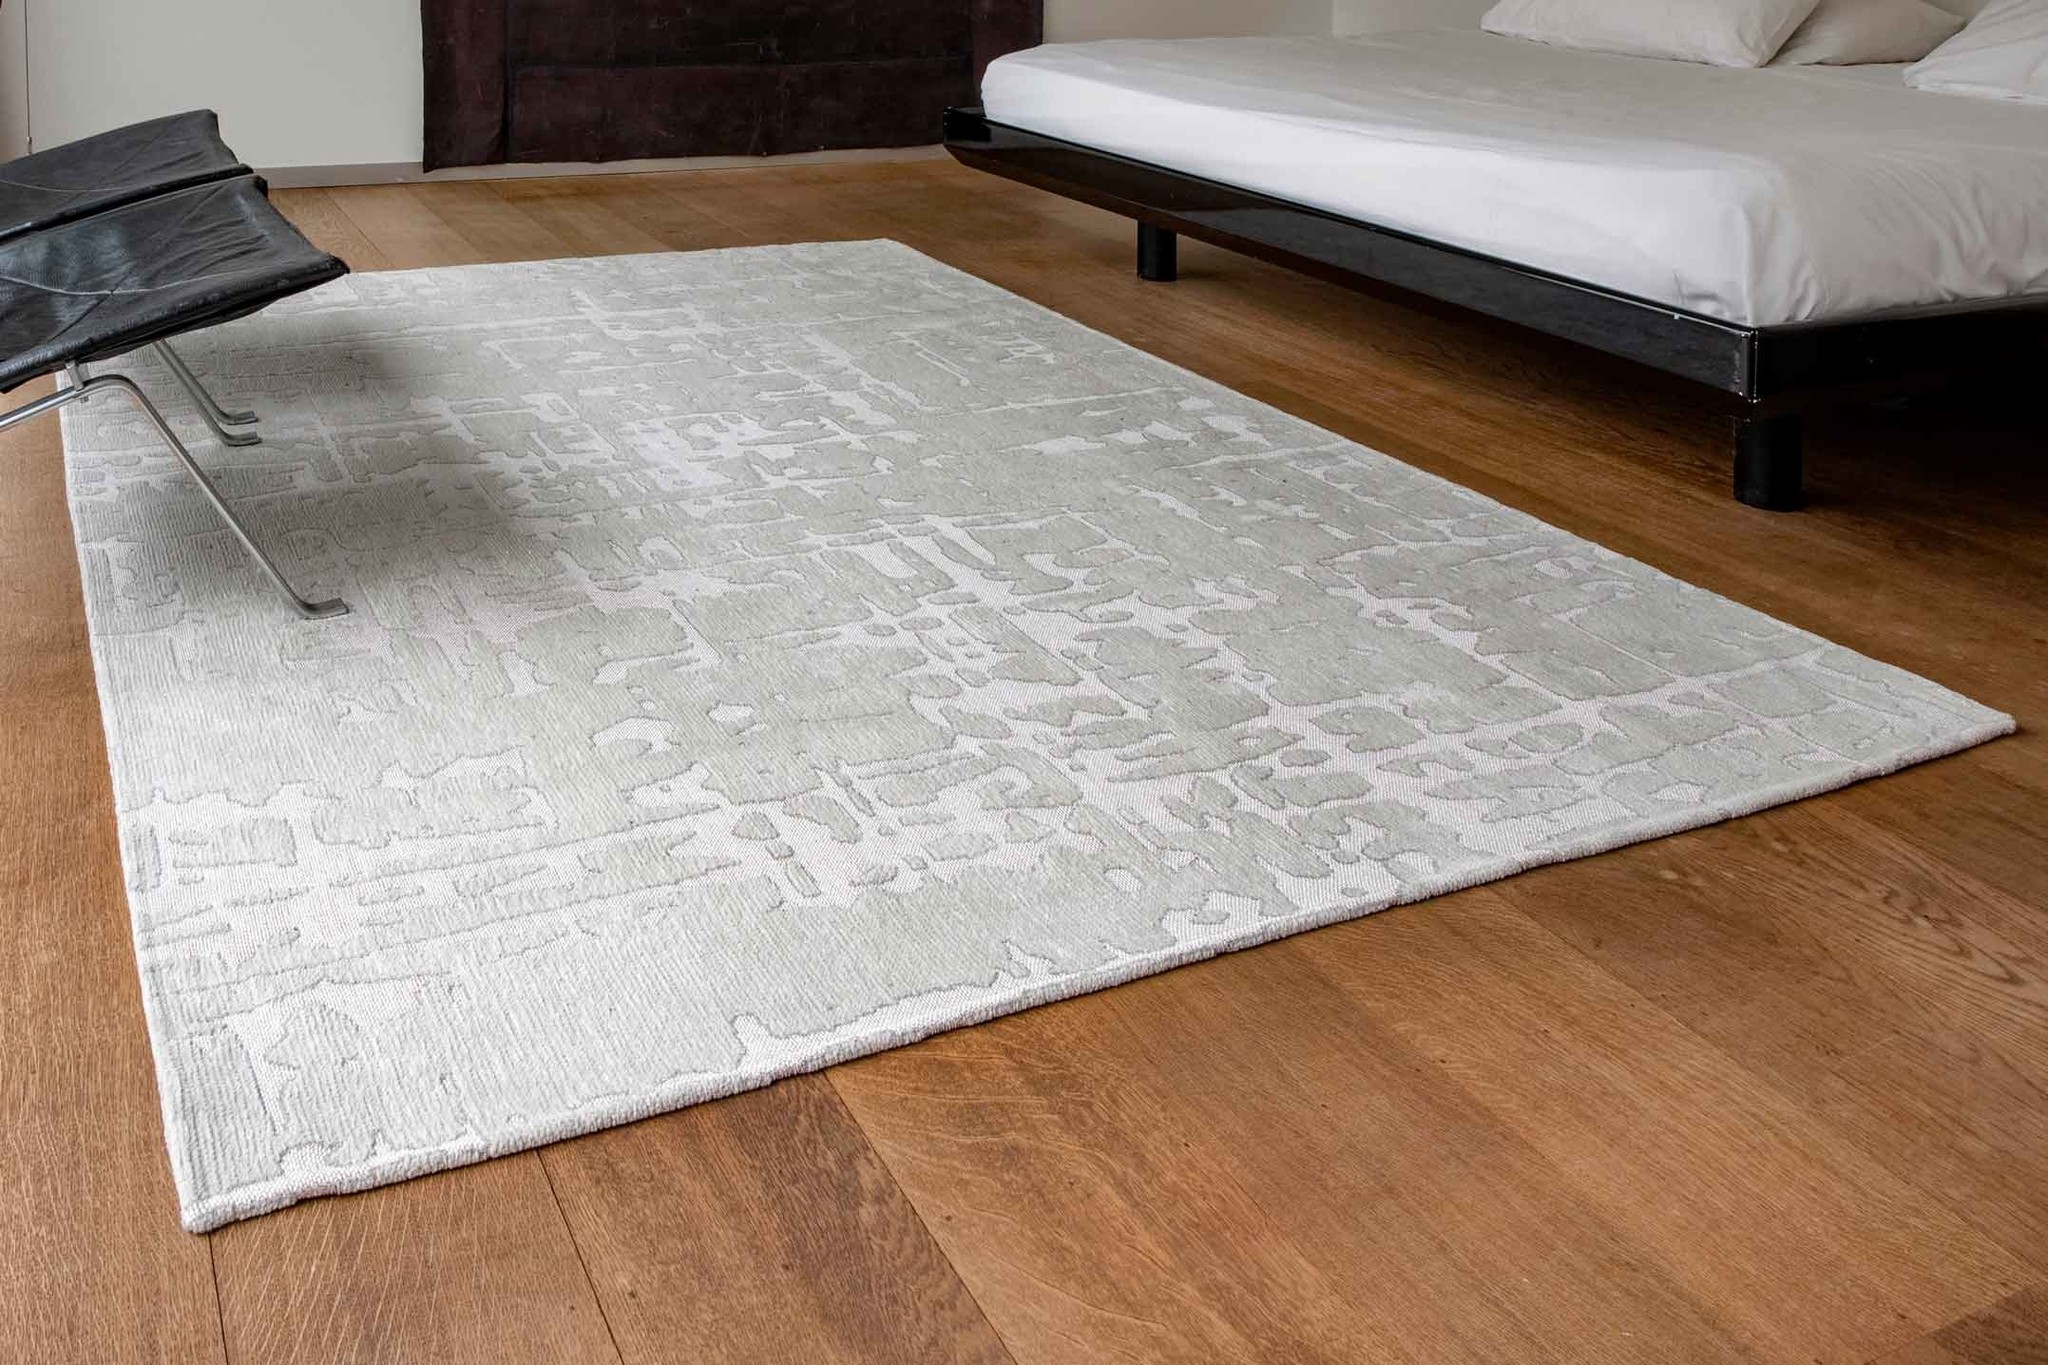 Abstract Silver Belgian Rug ☞ Size: 2' 7" x 8' 2" (80 x 250 cm)